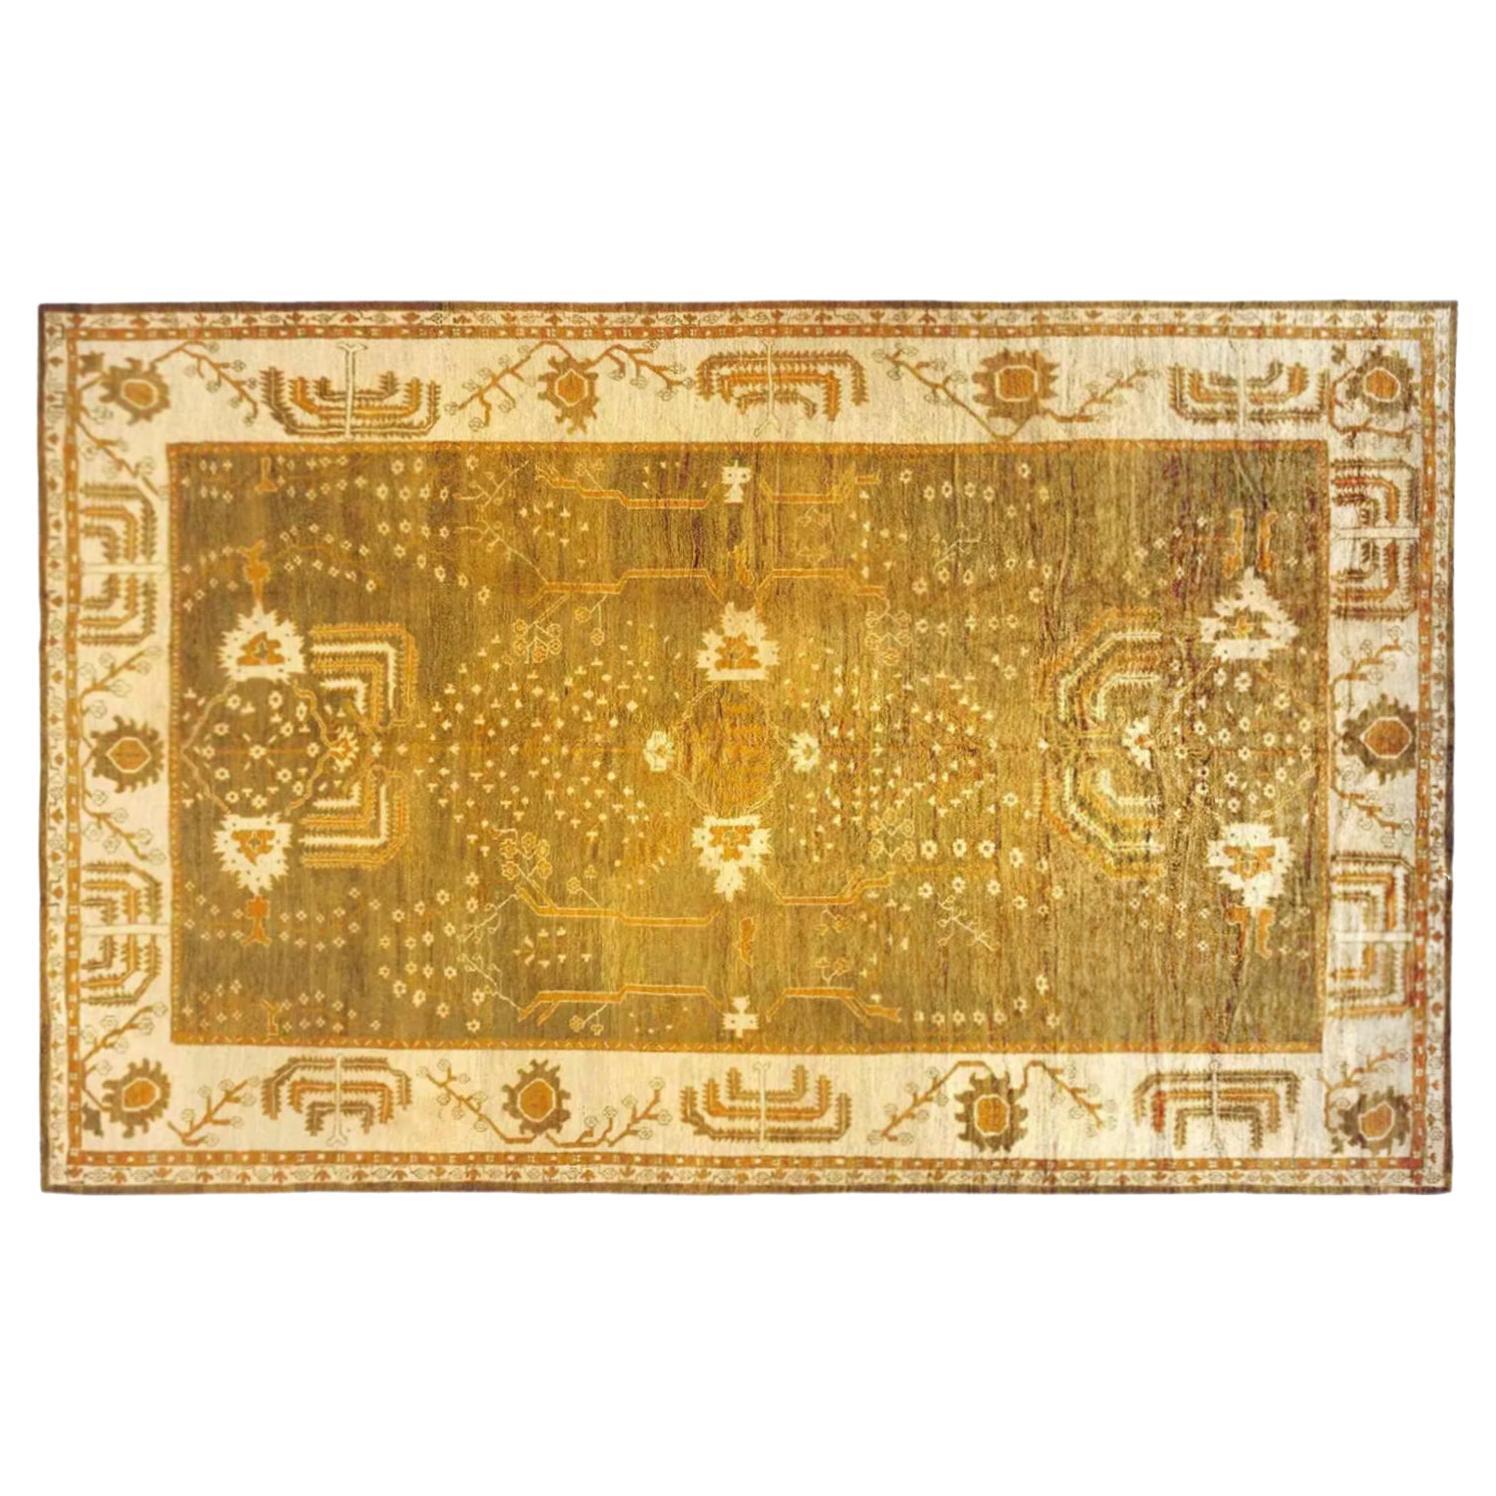 Antique Turkish Oushak Carpet with Cypress Trees, in Large Size, Green and Ivory